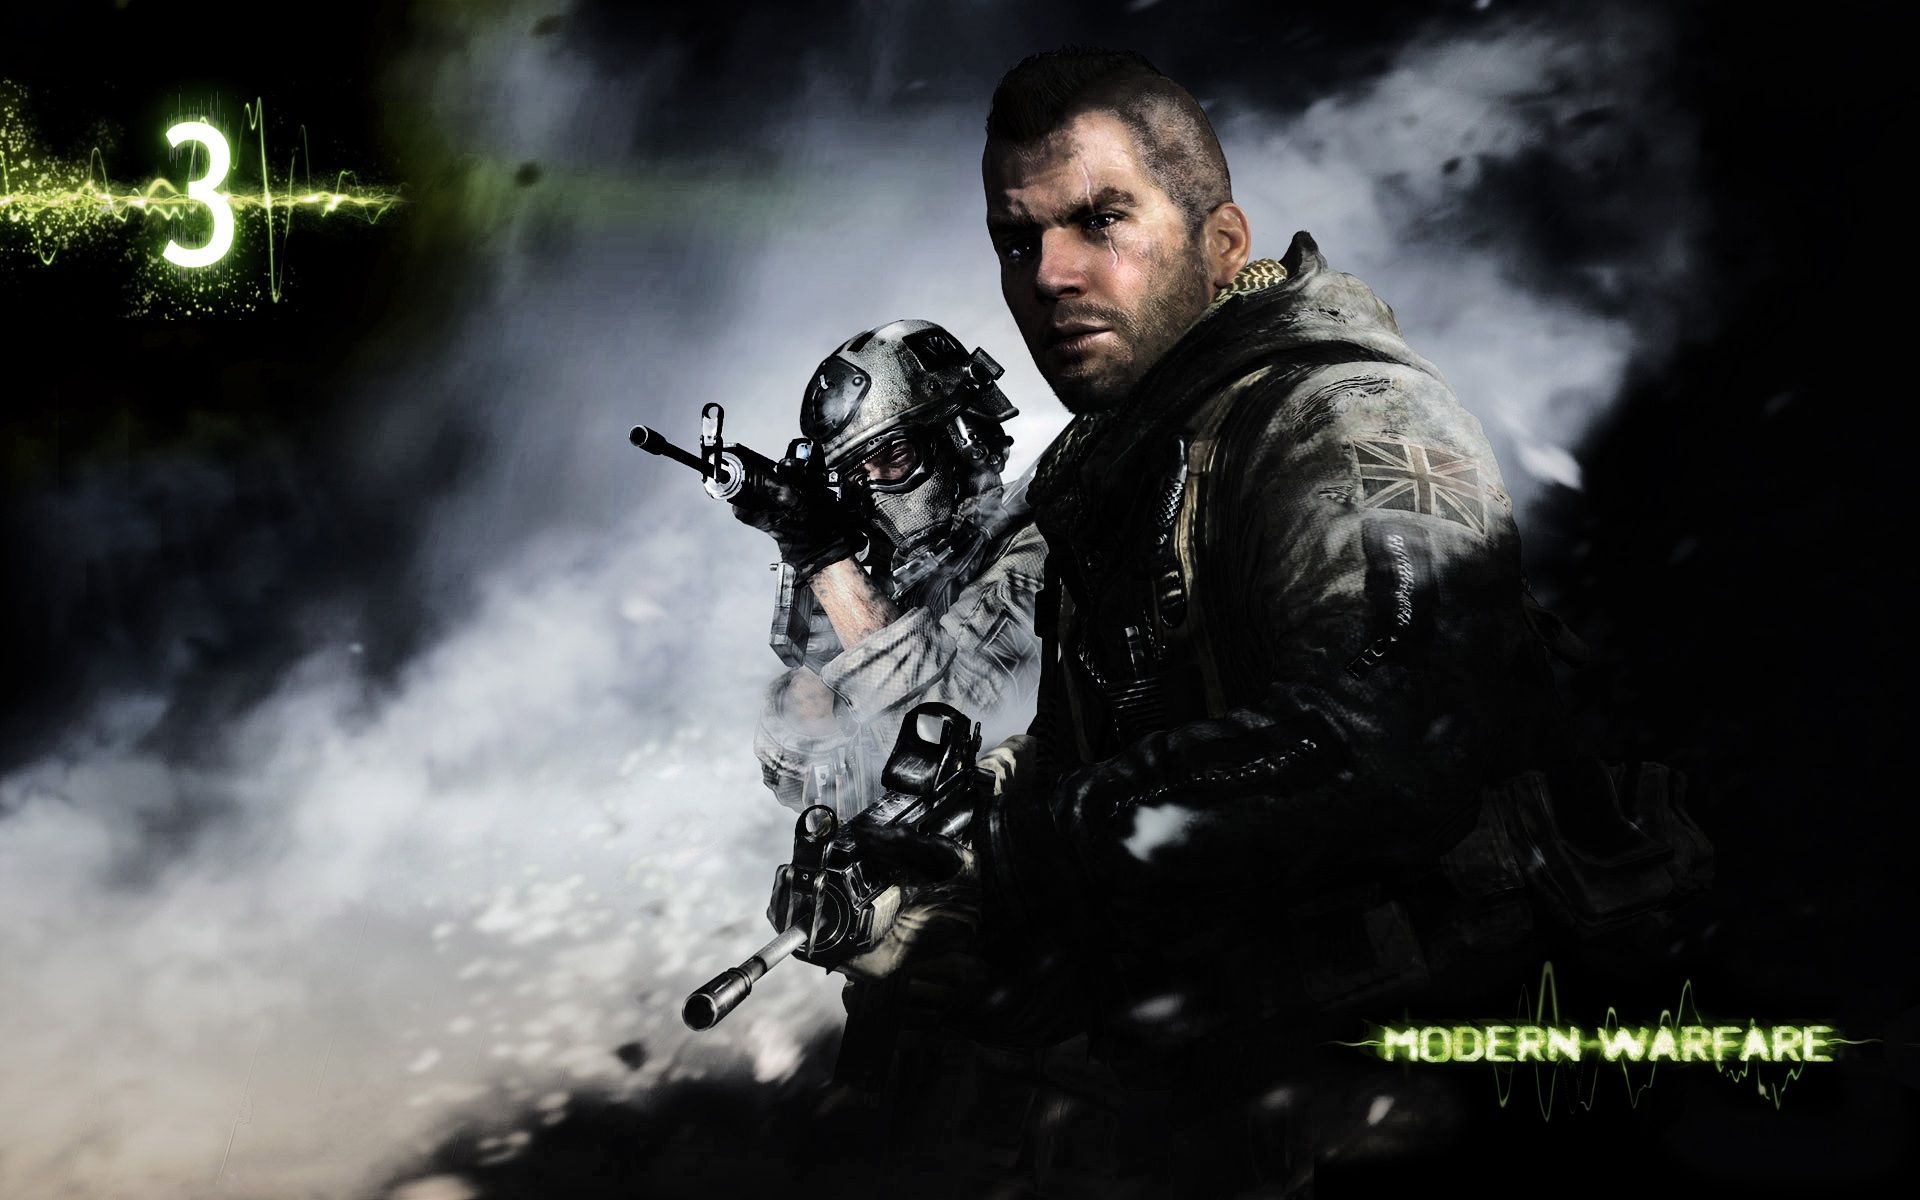 Call of Duty Modern Warfare 3 wallpapers - great shooter game in